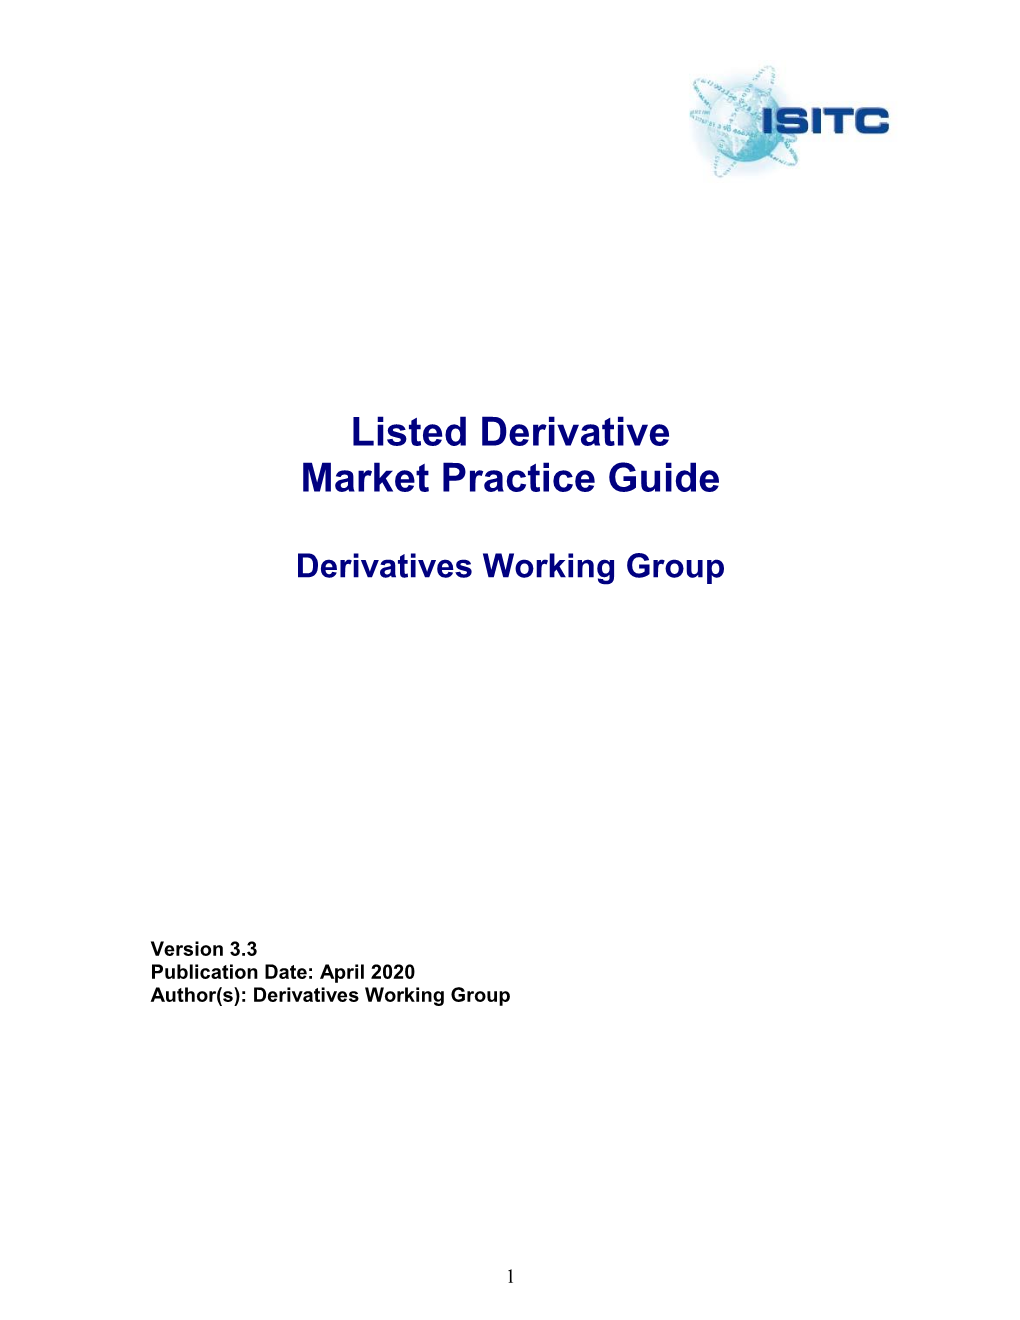 Listed Derivative Market Practice Guide